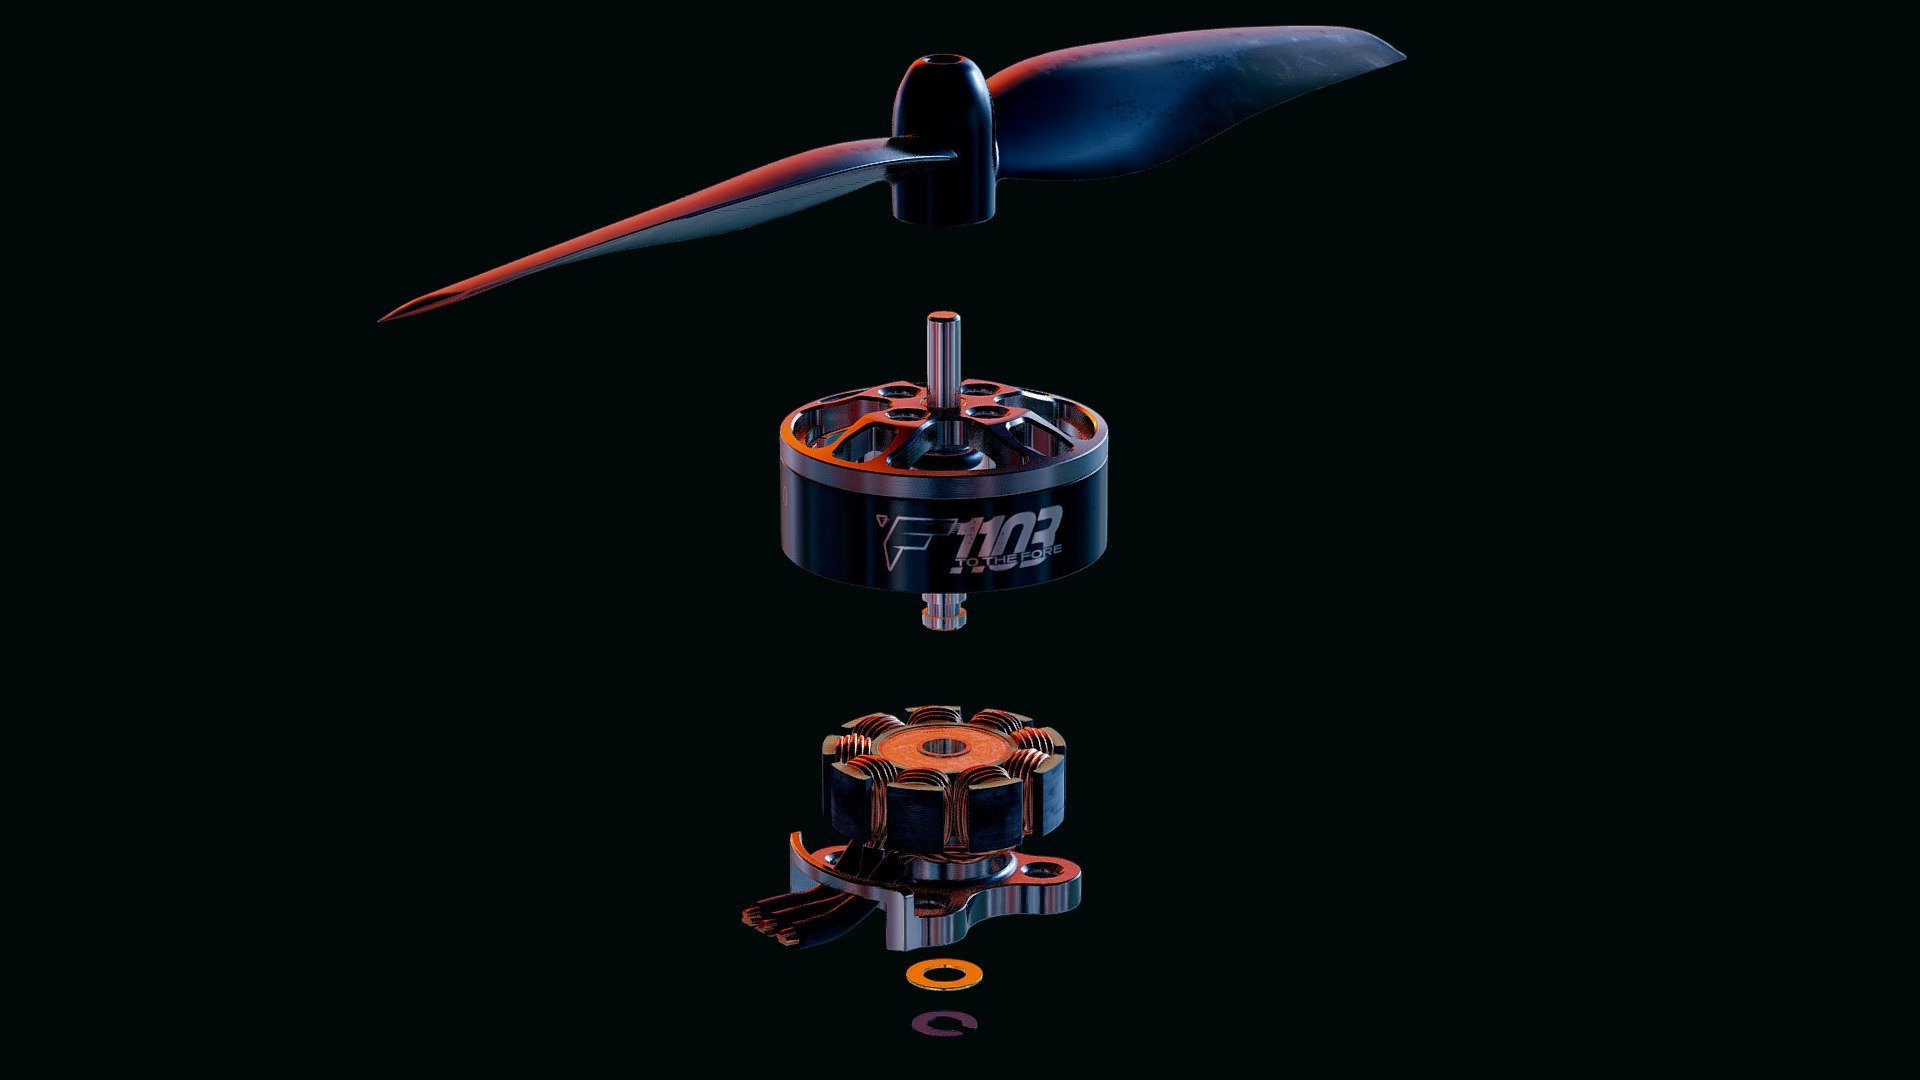 T-Motor F1103 Brushless Motor with a 65mm Bi-Blade Propeller. Modeled in Fusion 360, animated in Blender, textured in Substance Painter. The 65mm Propeller can be found free-to-download here - 1103 Brushless Motor + 65mm Propeller - Buy Royalty Free 3D model by The Van (@thevan) 3d model